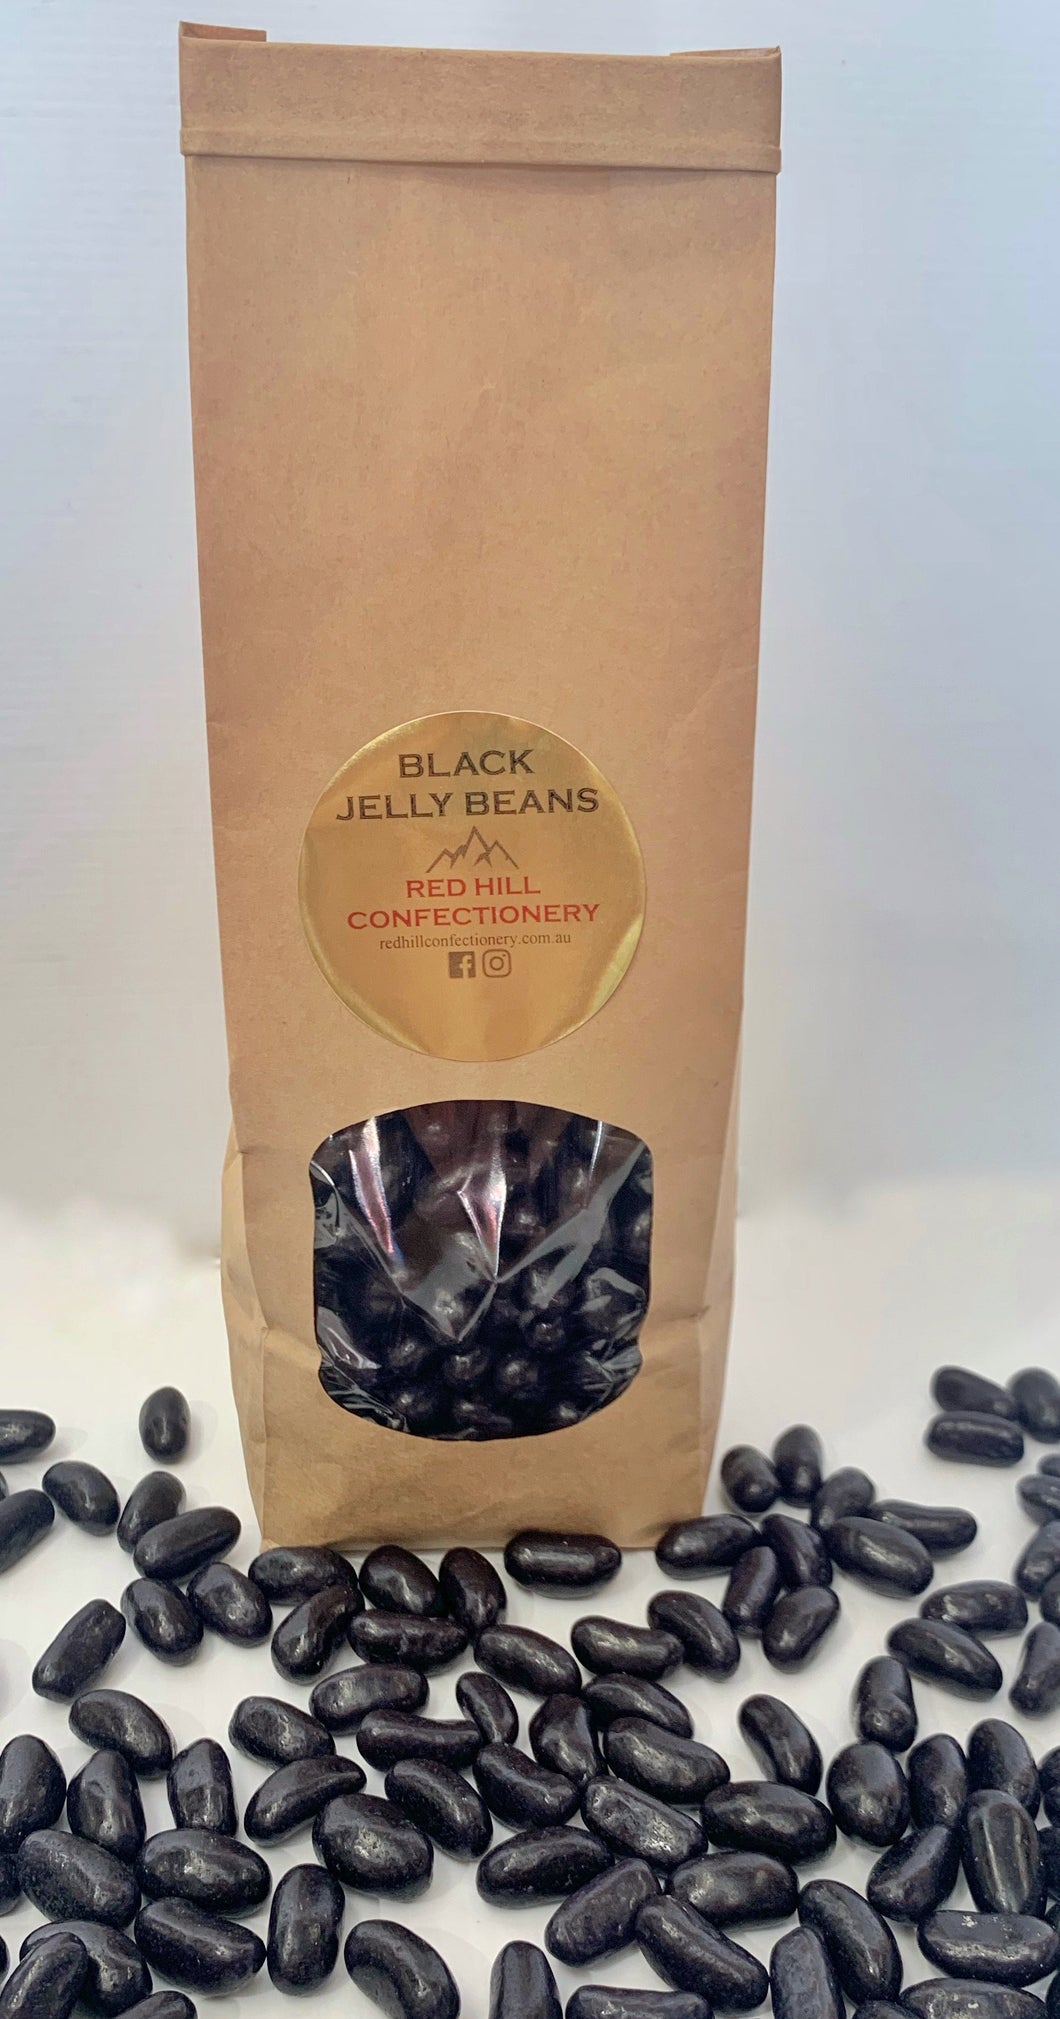 Red Hill Confectionery - Black Jelly Beans 450g Bag